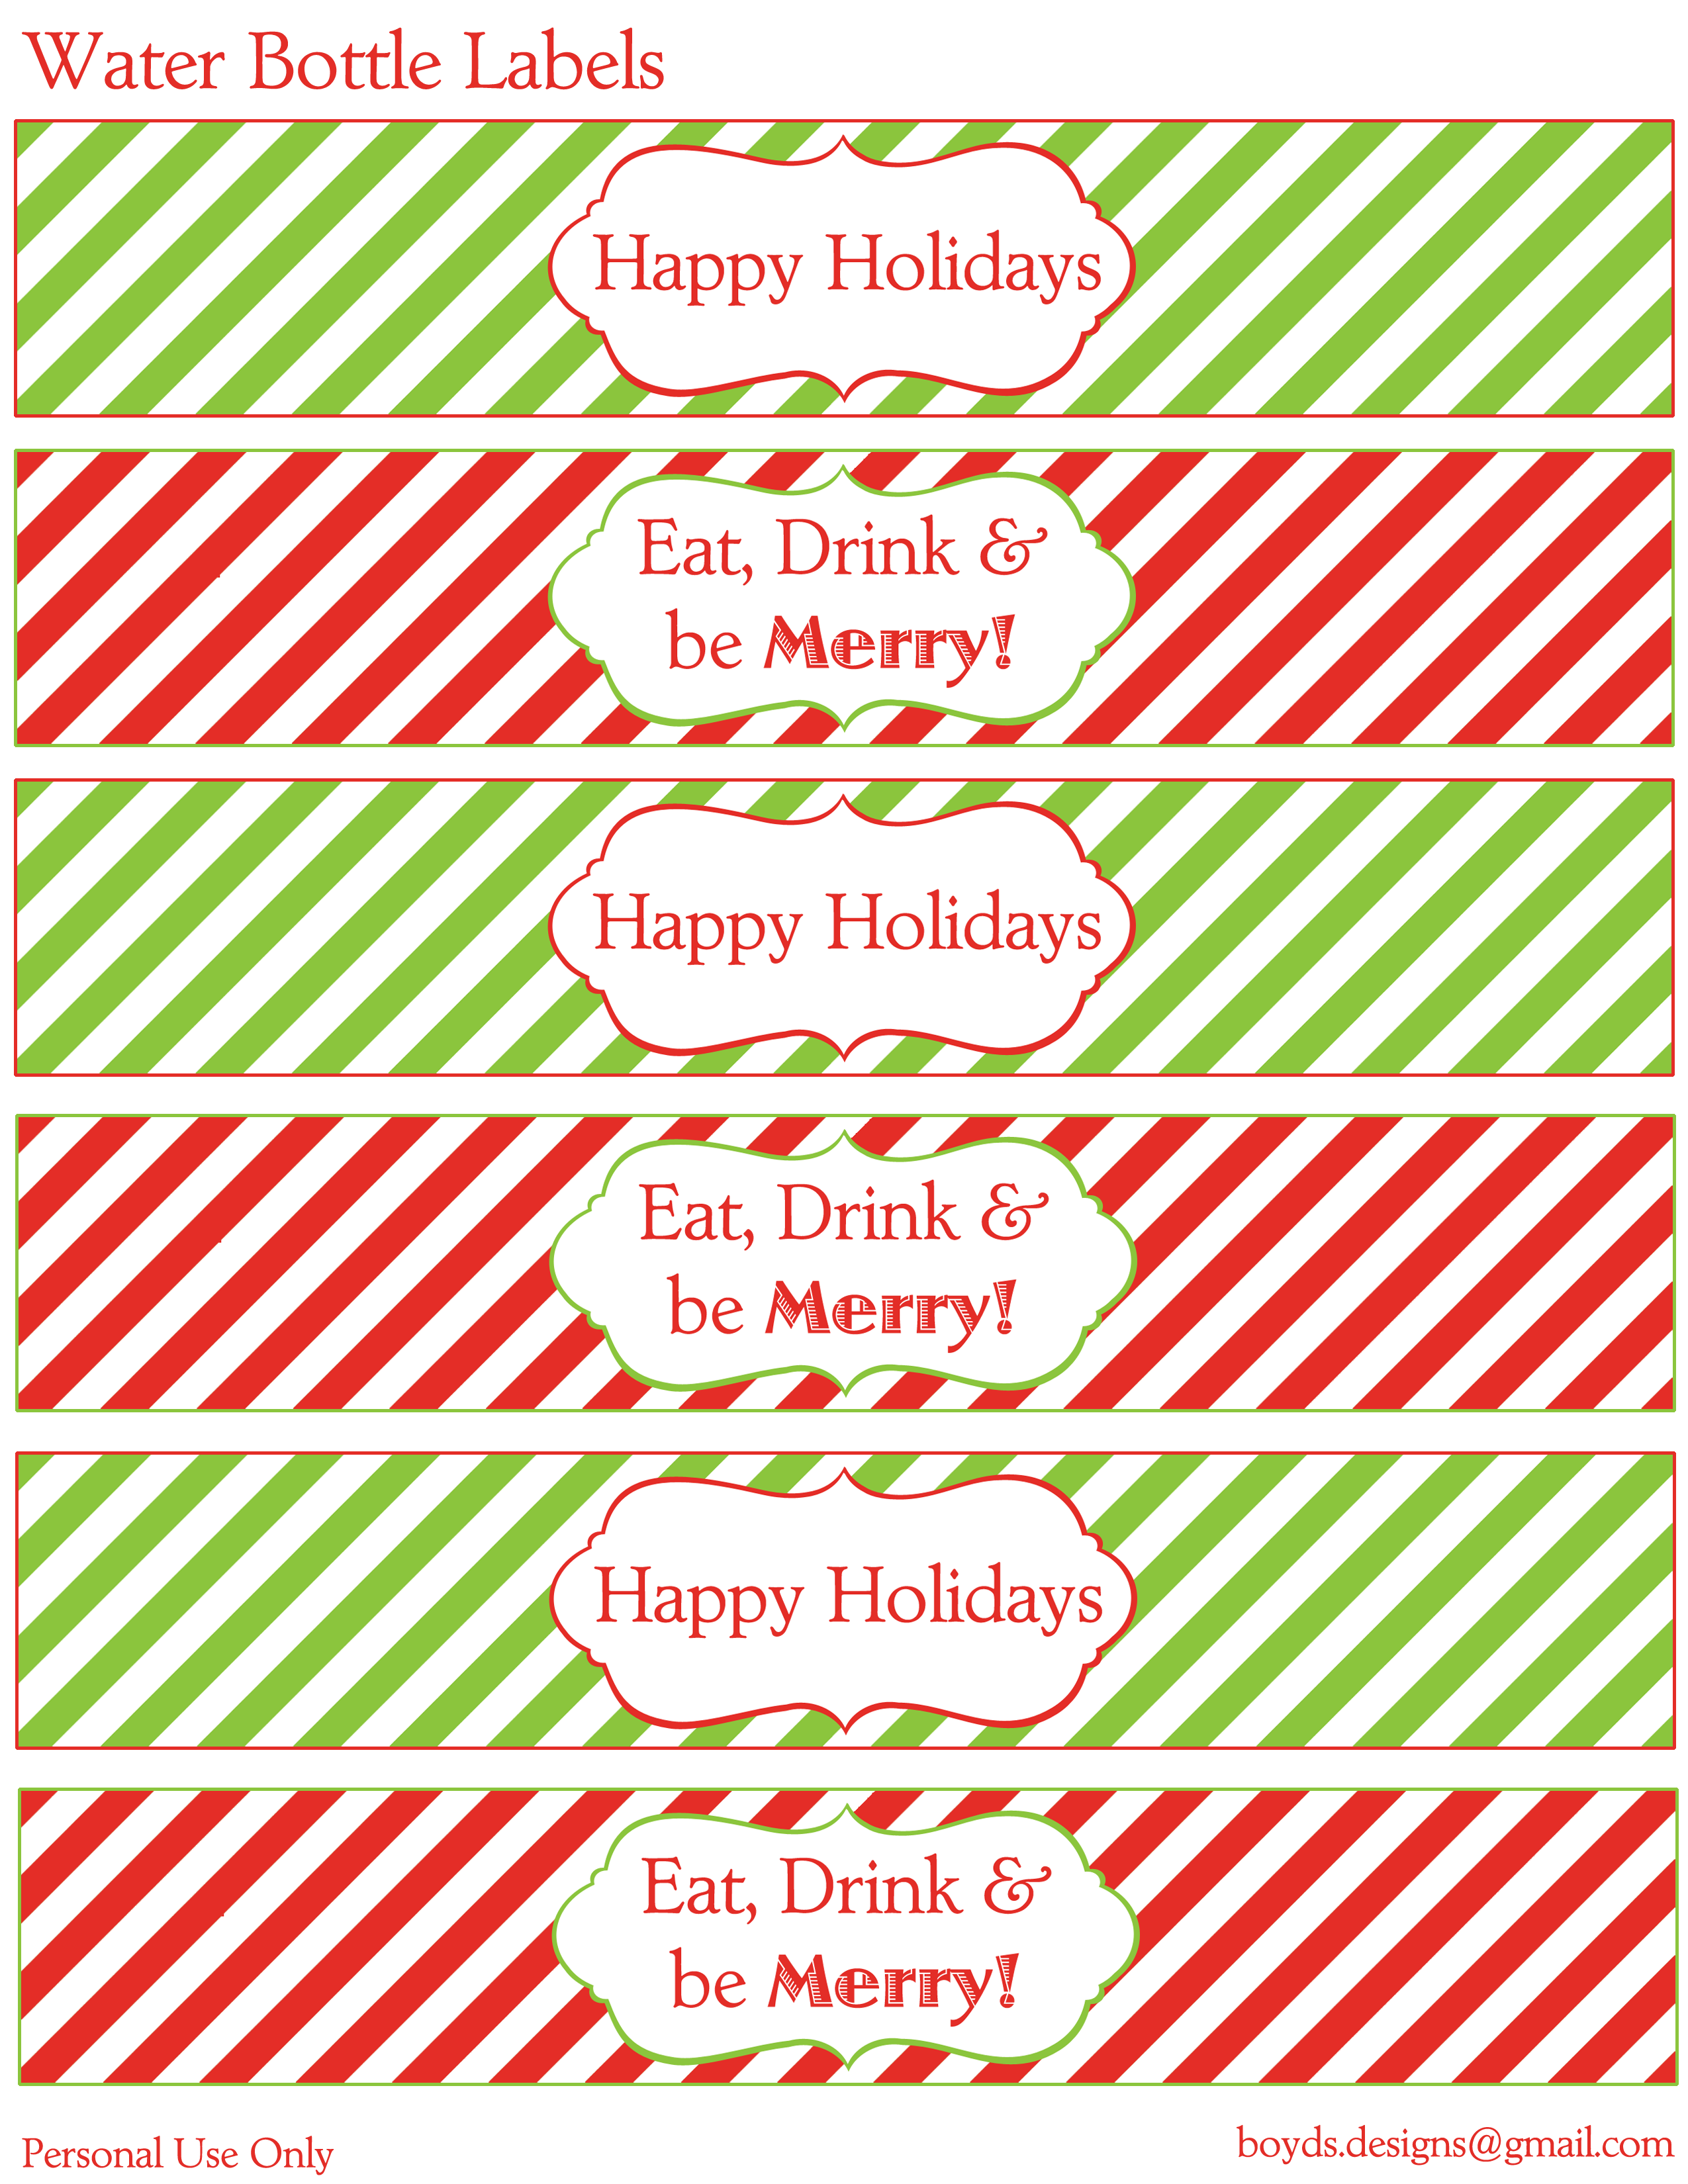 12 Days Of Christmas DIY Printable FREEBIES Day 3 Water Bottle Labels Carla Baxter Hunter